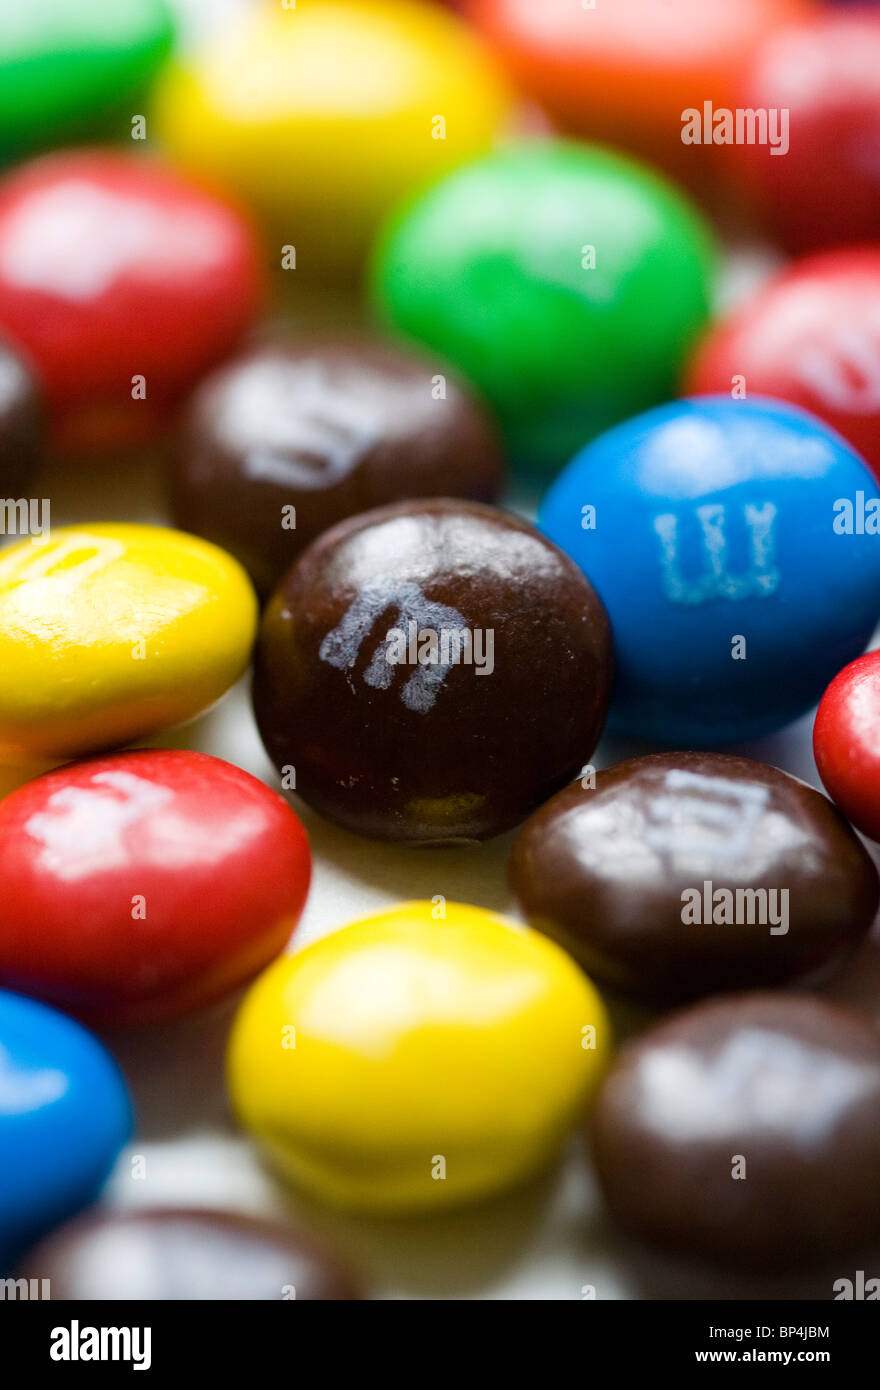 Winneconne, WI - 3 December 2018: A Package of white chocolate M&M in share  size on an isolated background Stock Photo - Alamy